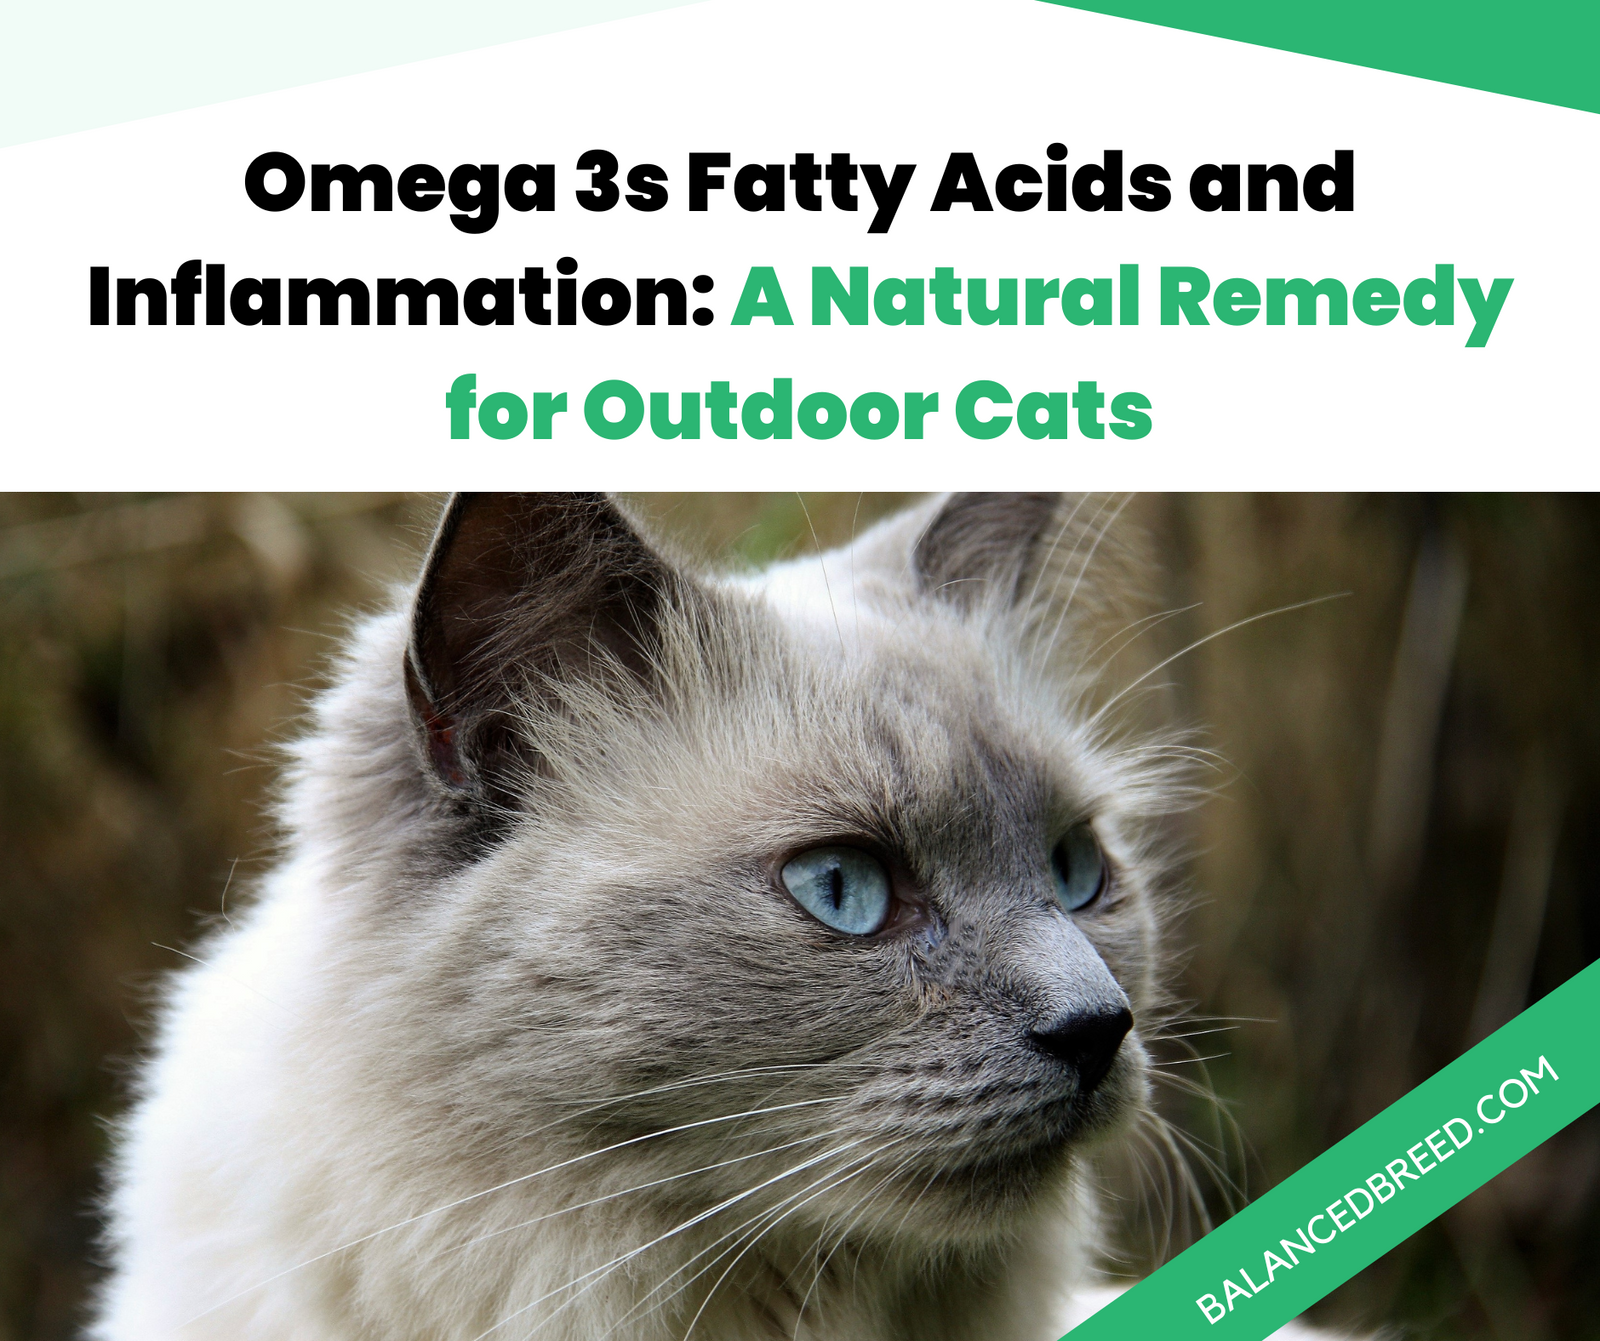 Benefits of Omega 3's for outdoor cats